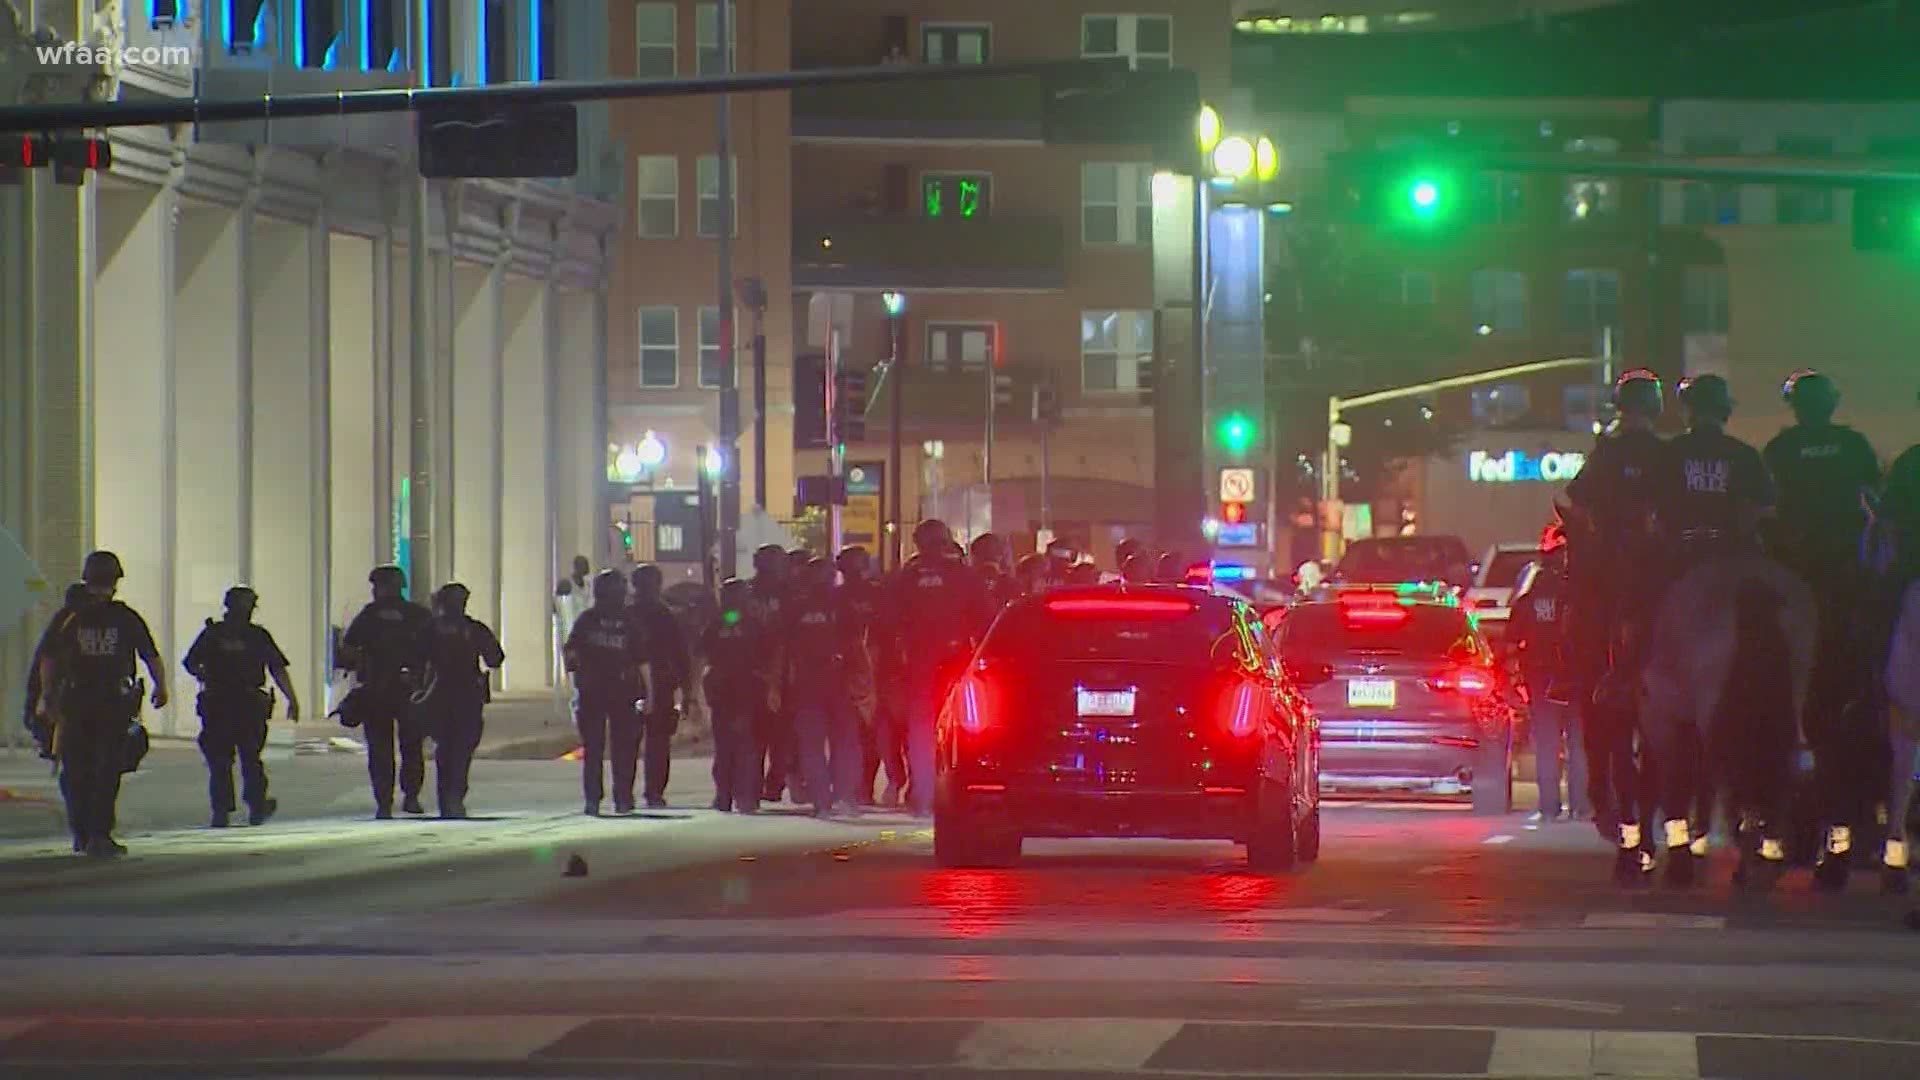 Dallas, Highland Park and University Park are under a curfew from 7 p.m. until 6 a.m. every night "for the next few days," according to Police Chief Renee Hall.